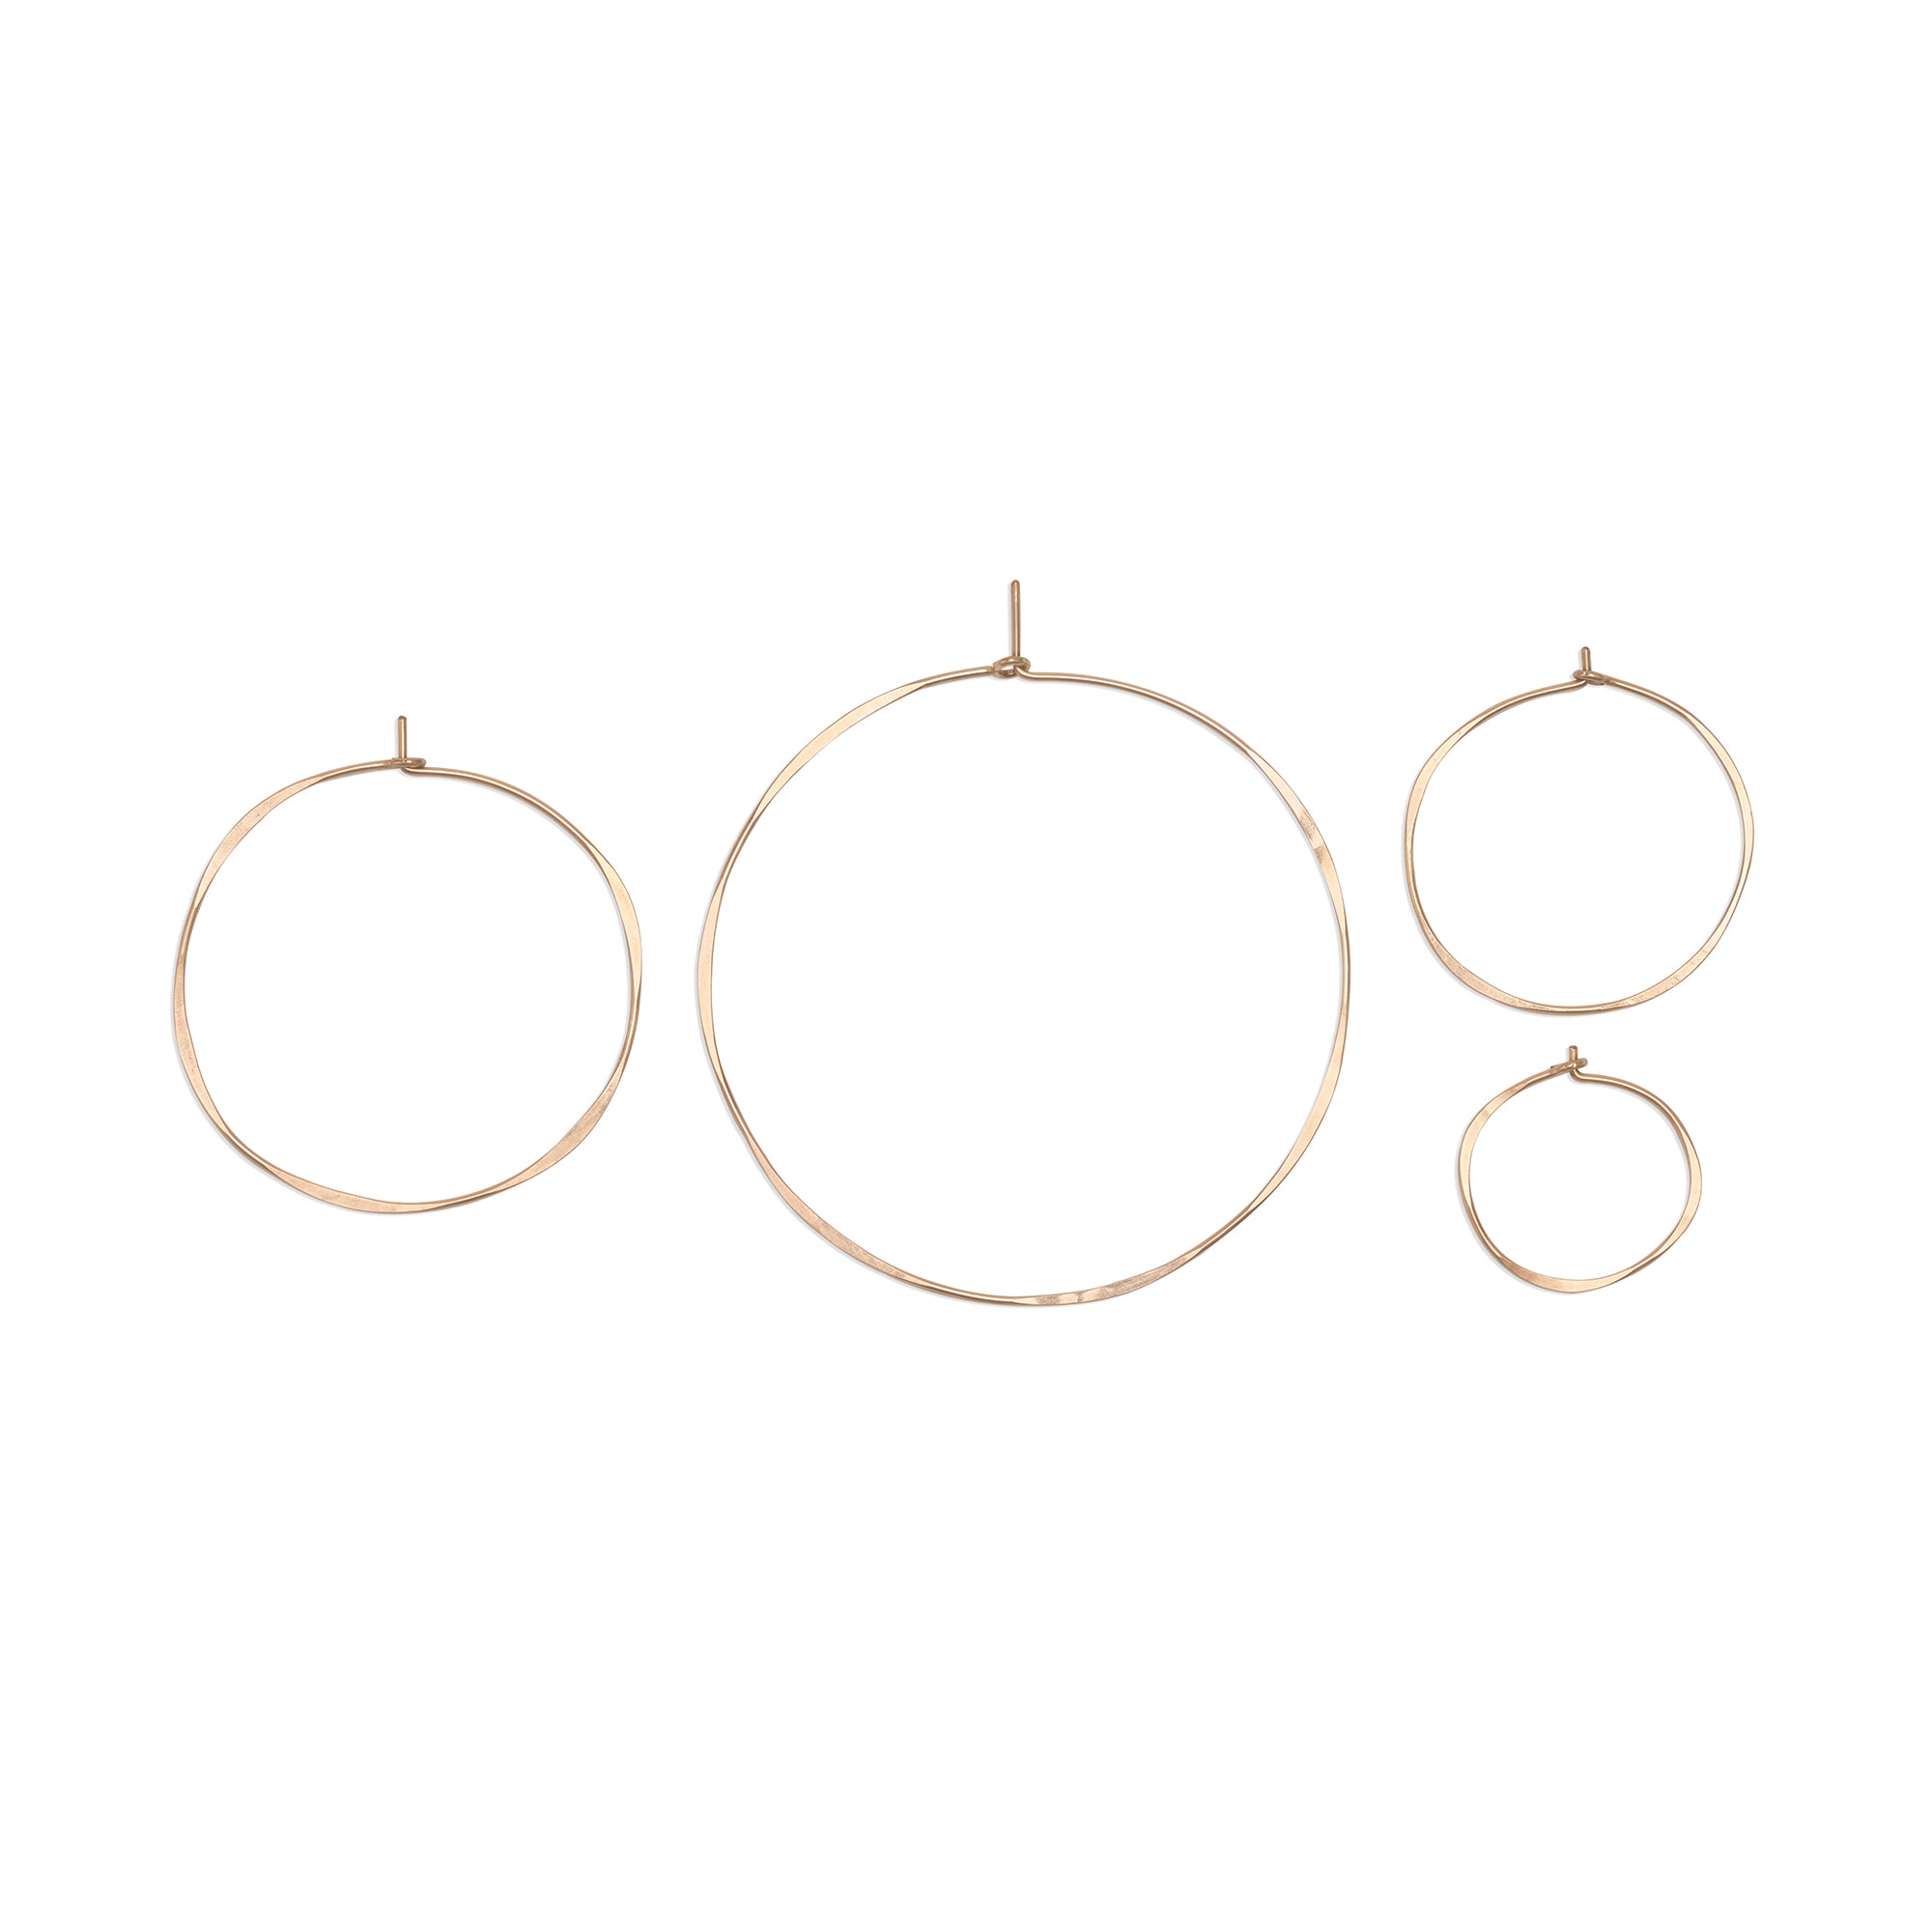 Bold and versatile, our classic hammered hoops are the perfect statement-making pair to add to a modern, casual collection